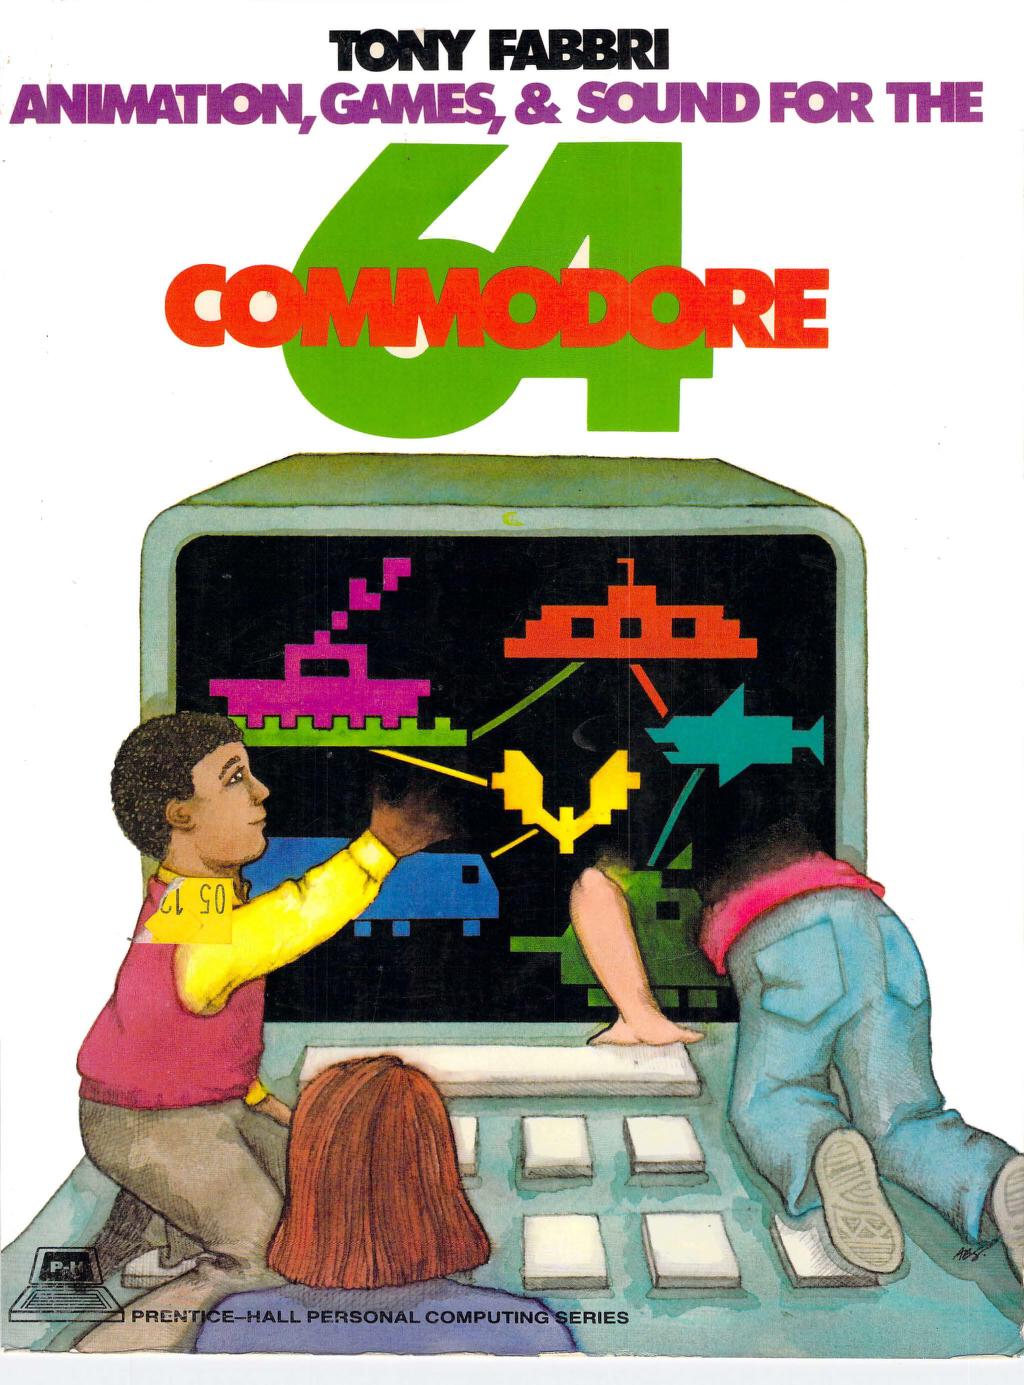 Animation, Games, & Sound for the Commodore 64 : Tony Fabbri : Free  Download, Borrow, and Streaming : Internet Archive